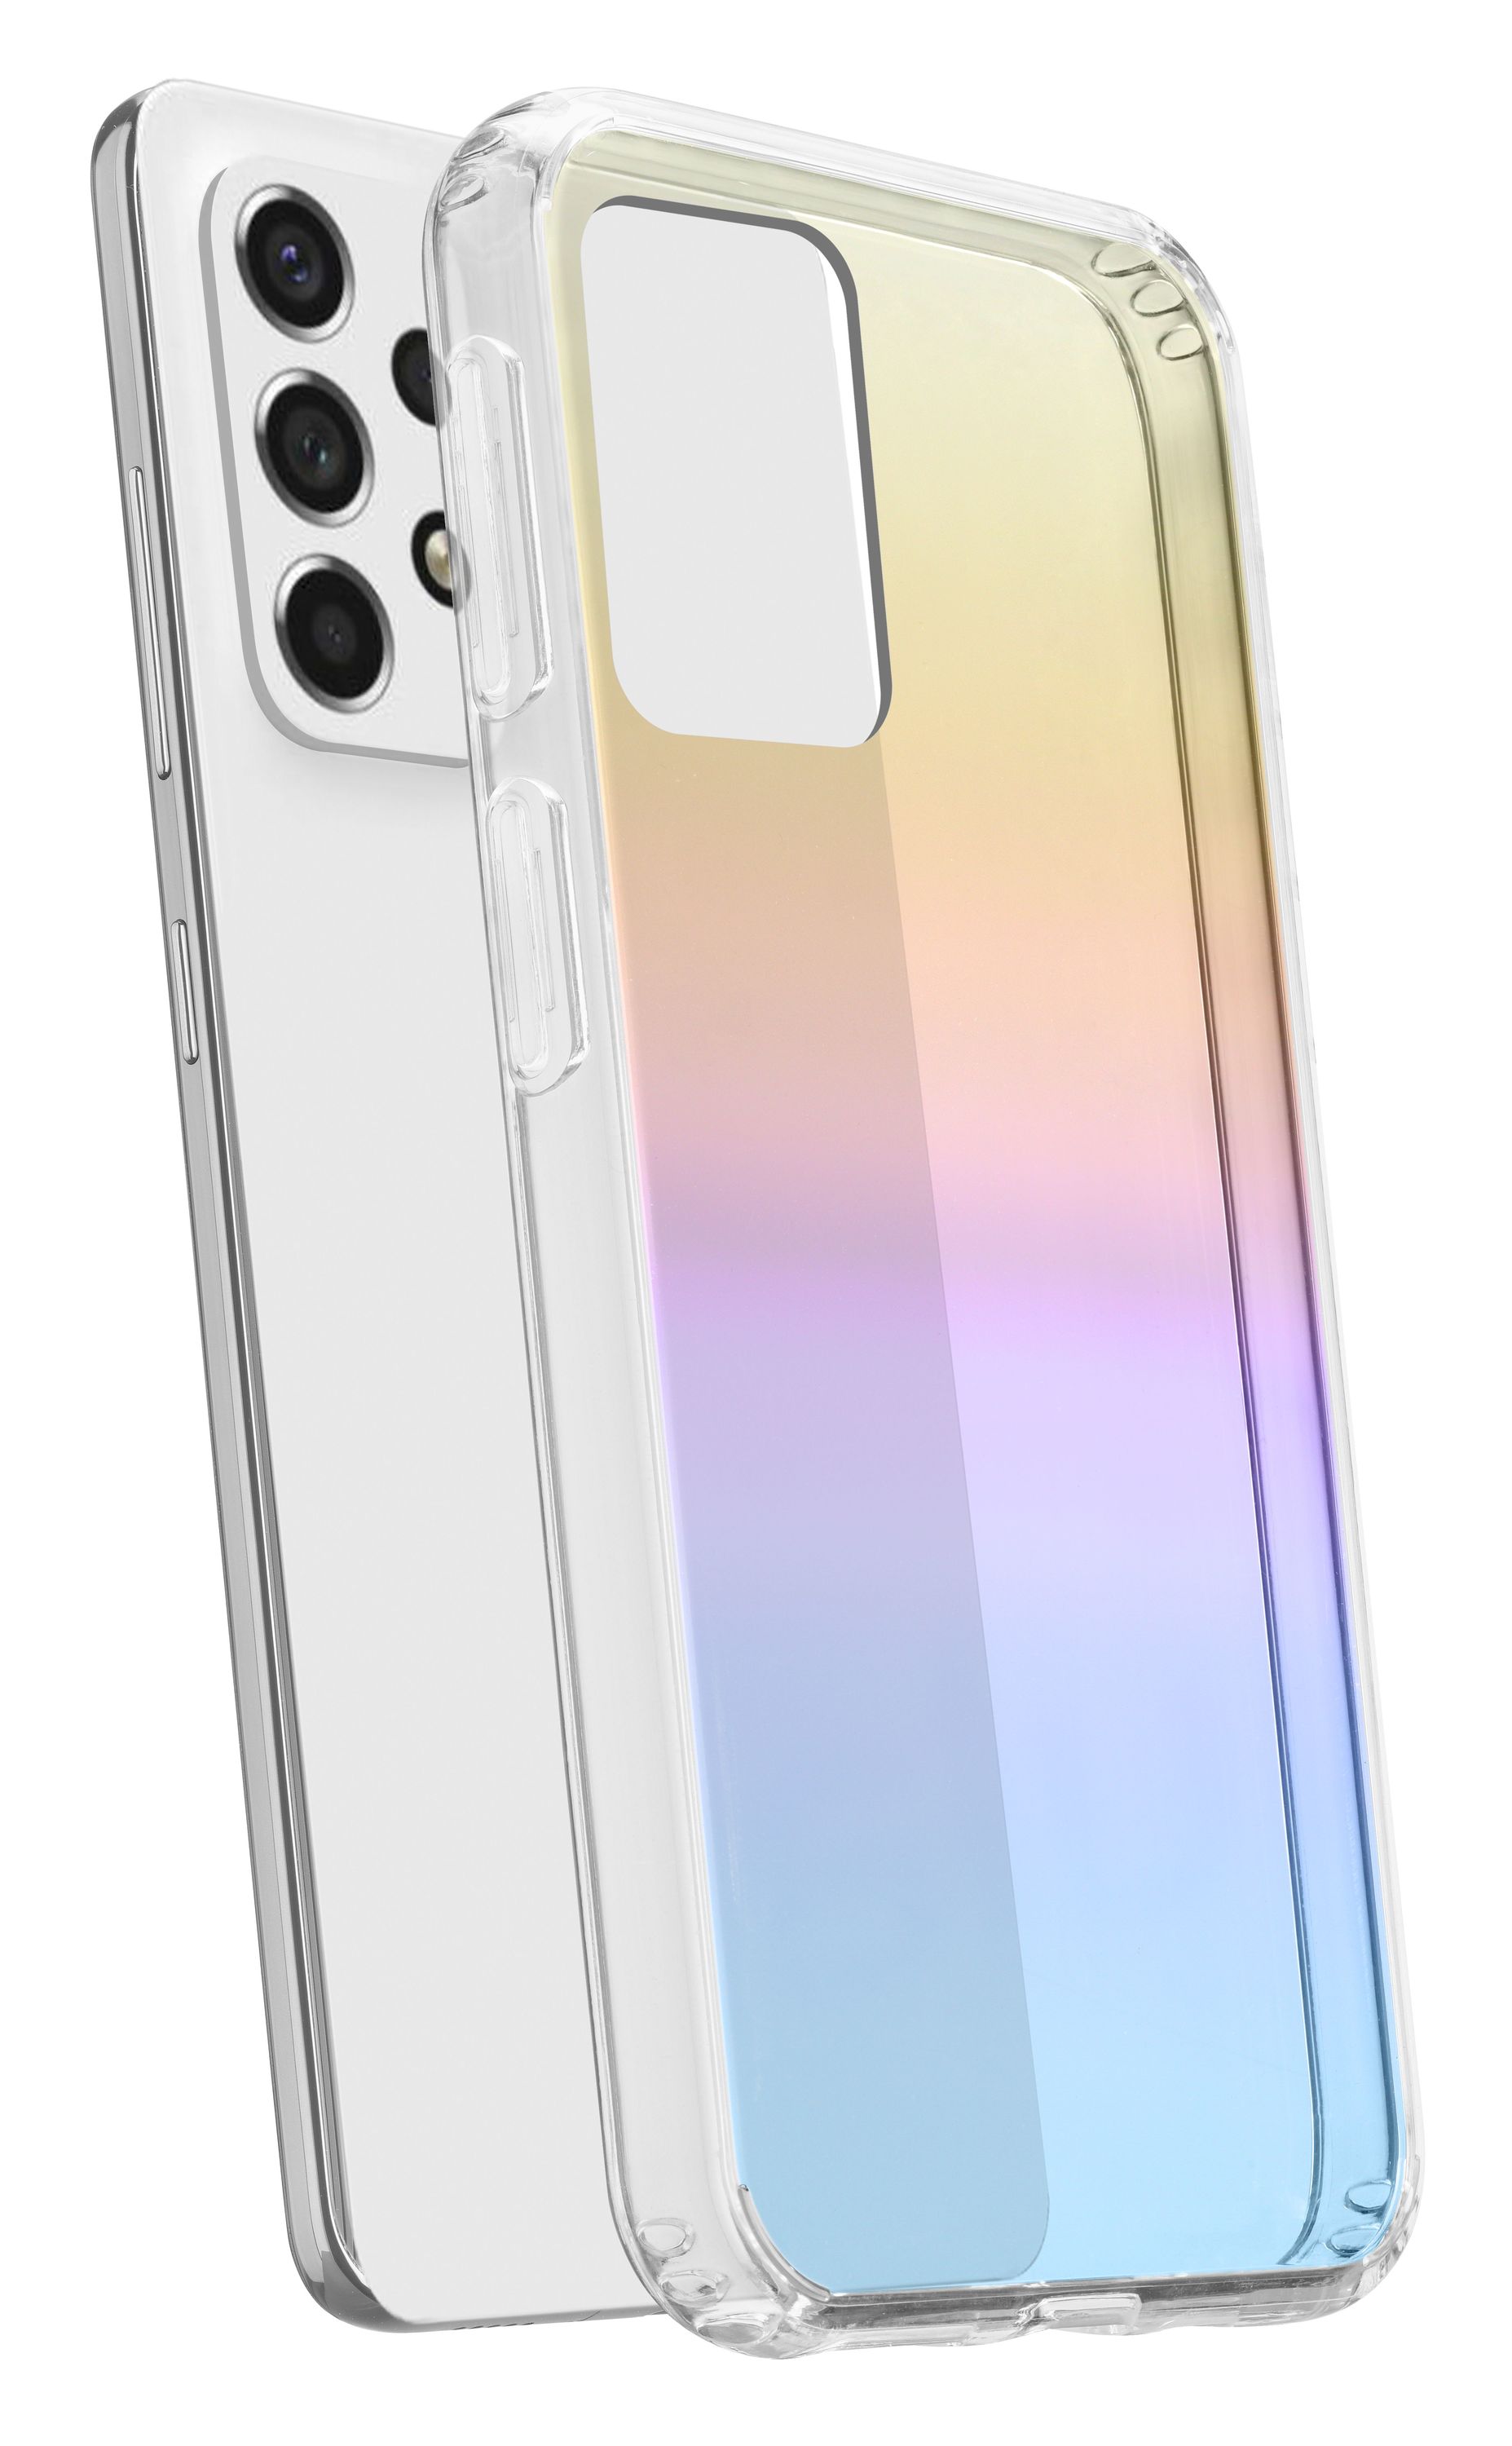 Prisma - Galaxy A53 5G | Smartphone cases | Protection and Style |  CellularLine Site DE